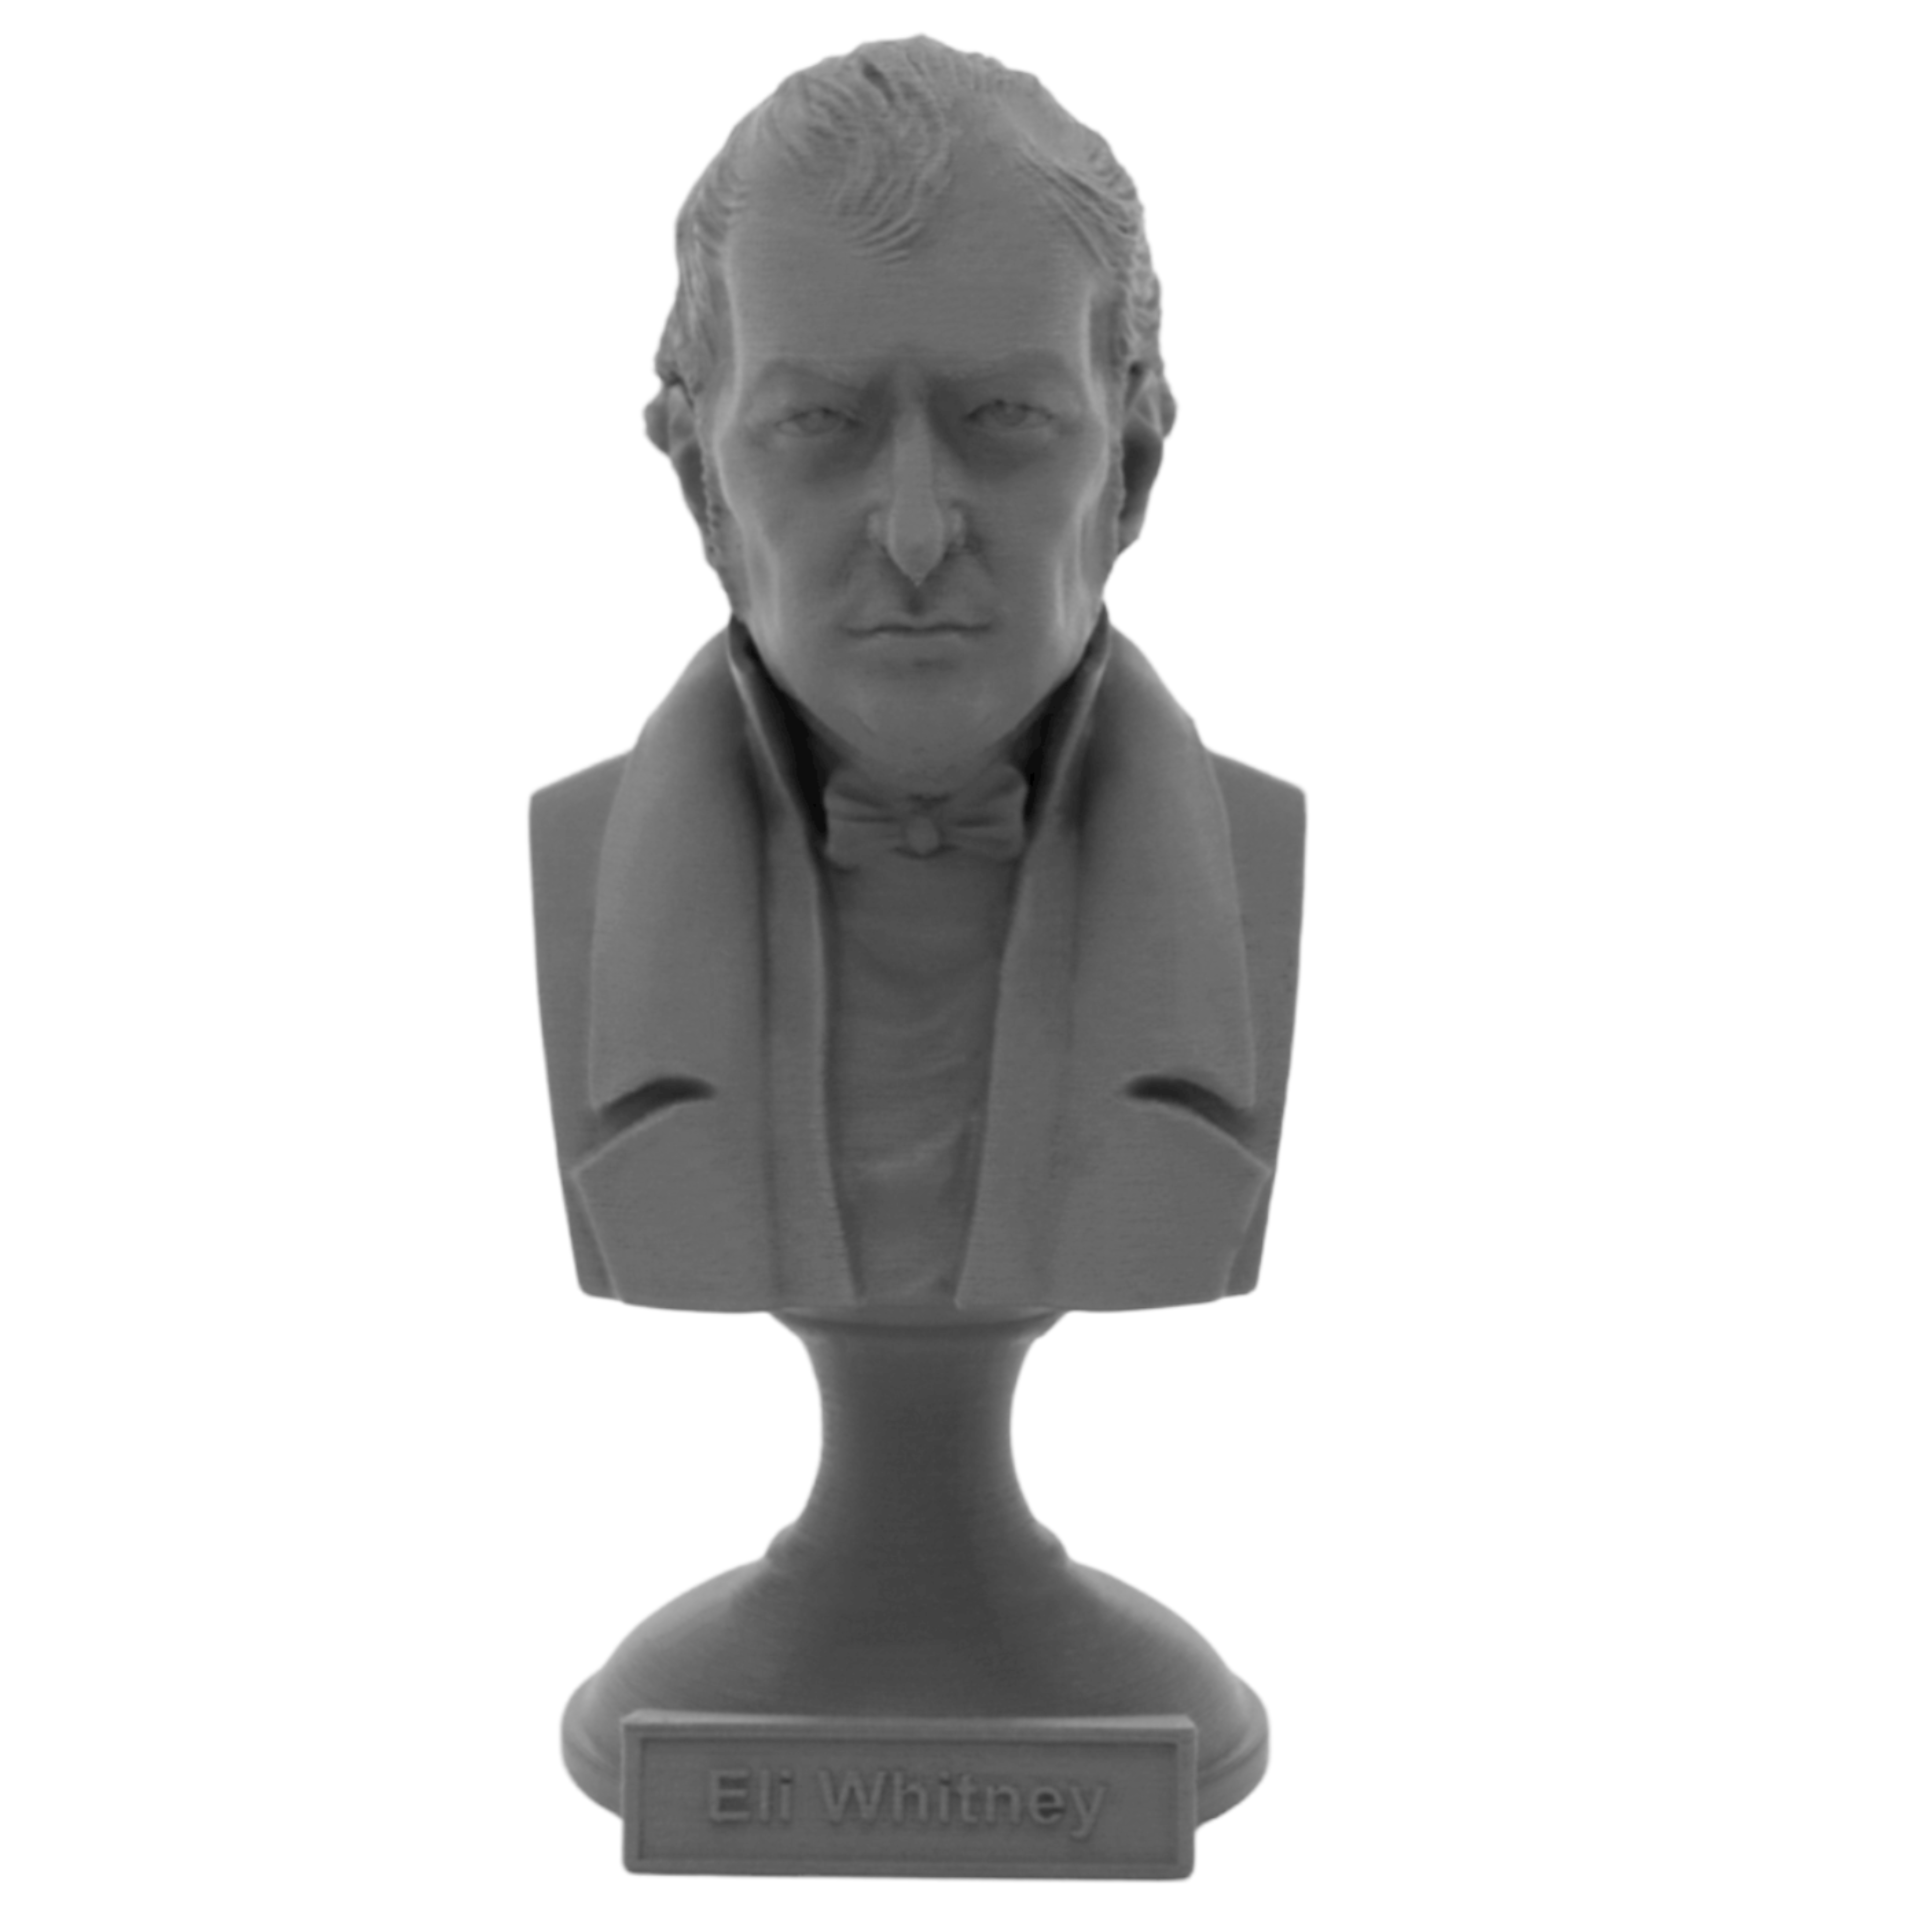 Eli Whitney Famous American Inventor Sculpture Bust on Pedestal